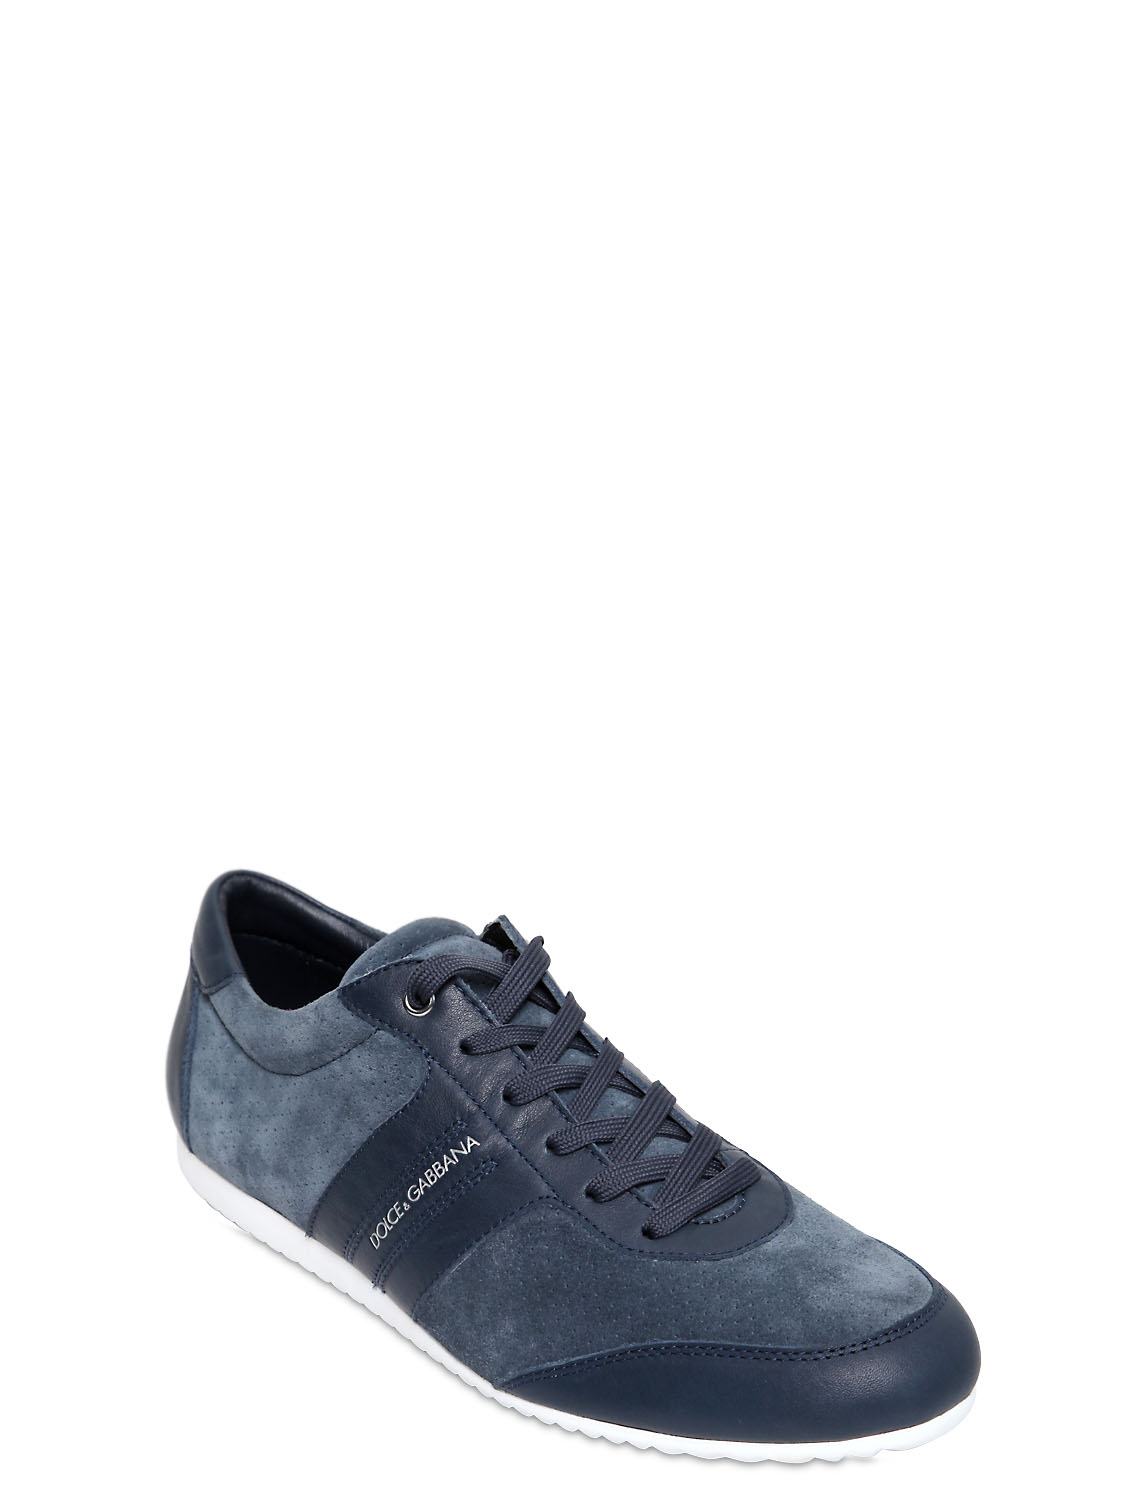 Dolce & Gabbana Australia Suede and Leather Sneakers in Blue for Men ...